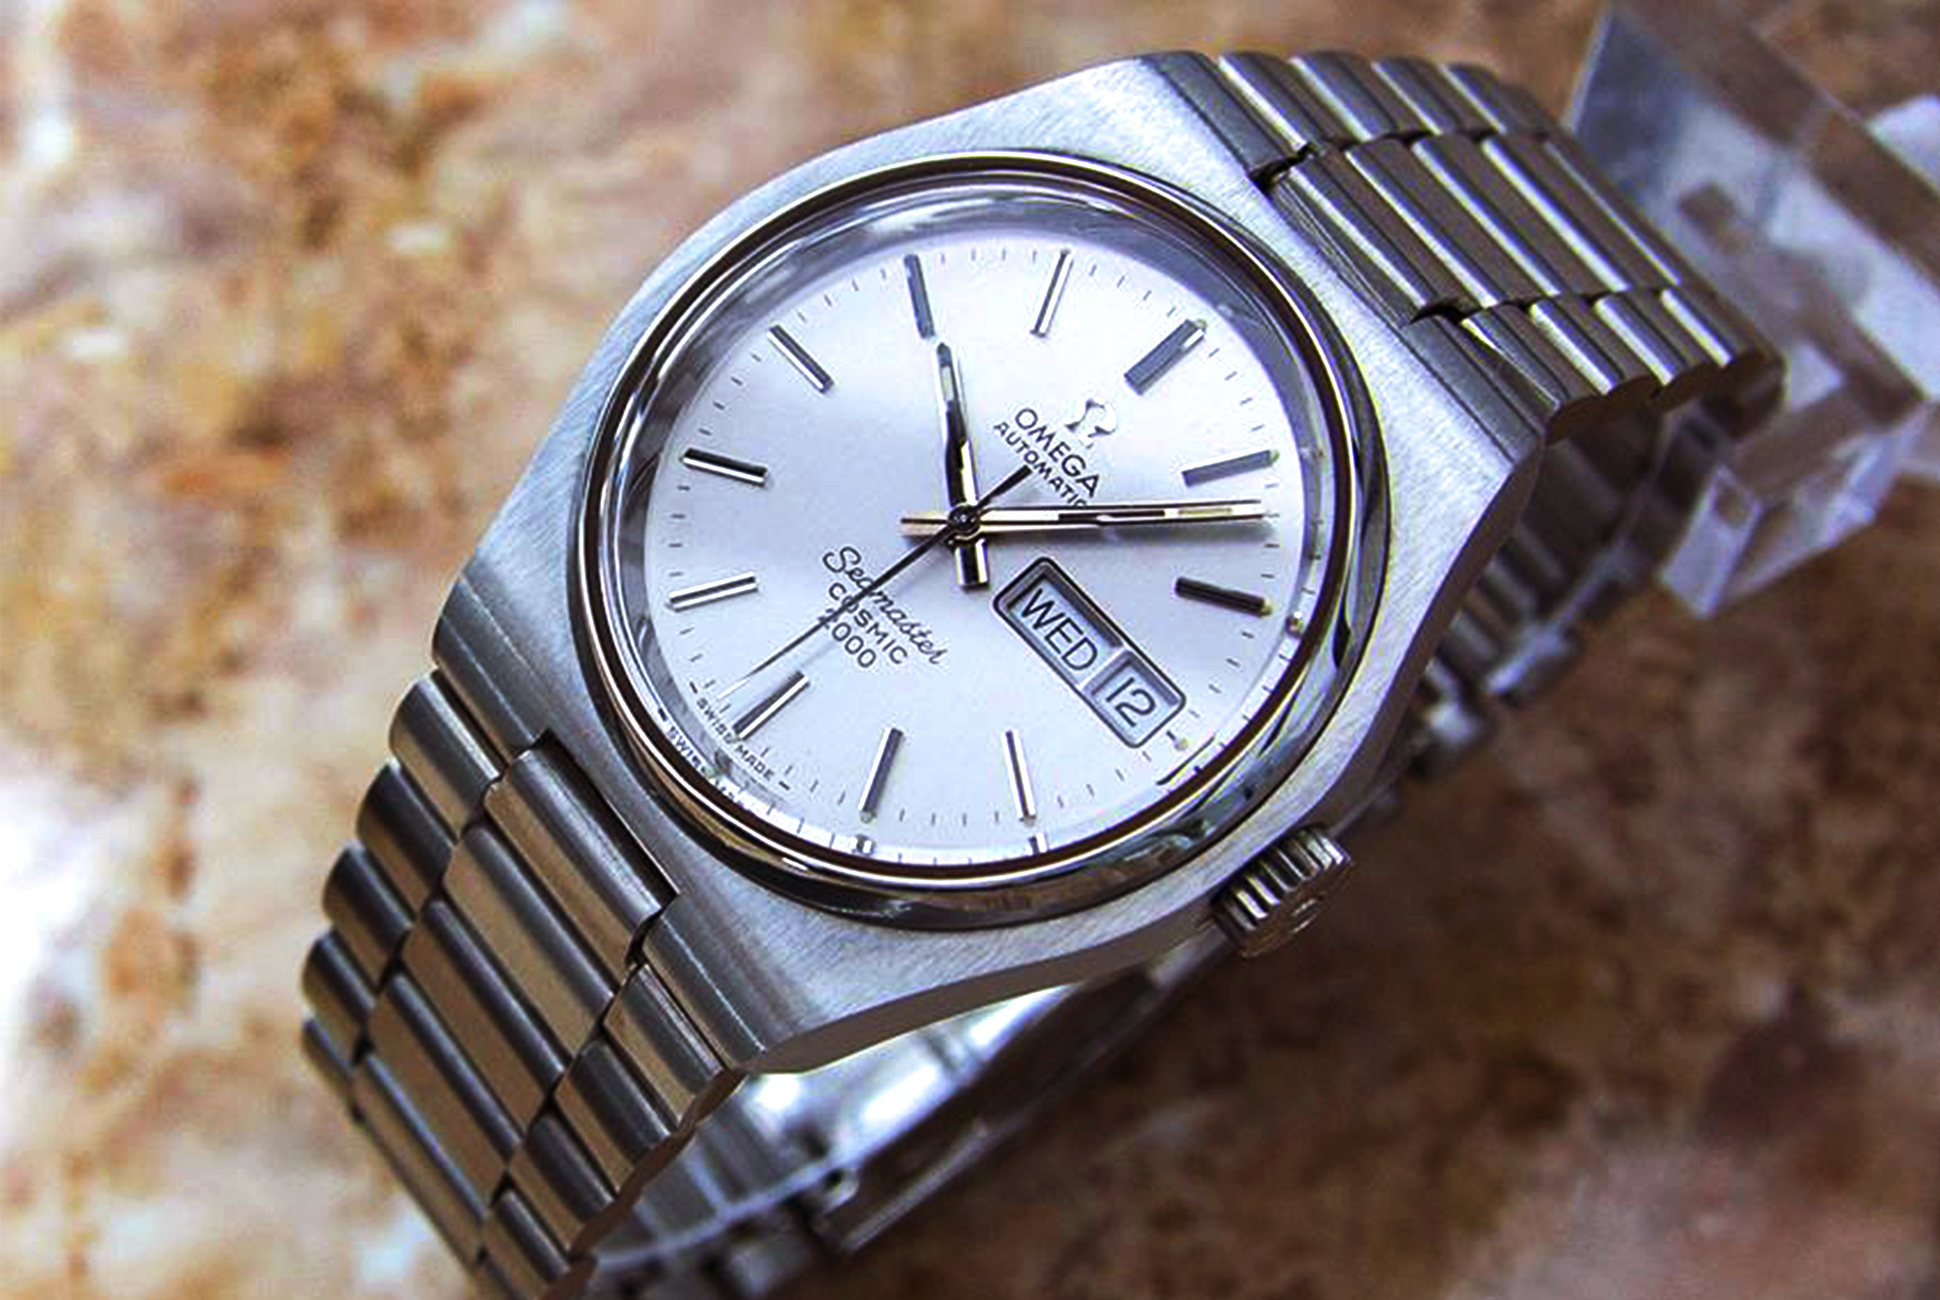 Vintage Steel Watches You Can Wear Every Day • Gear Patrol